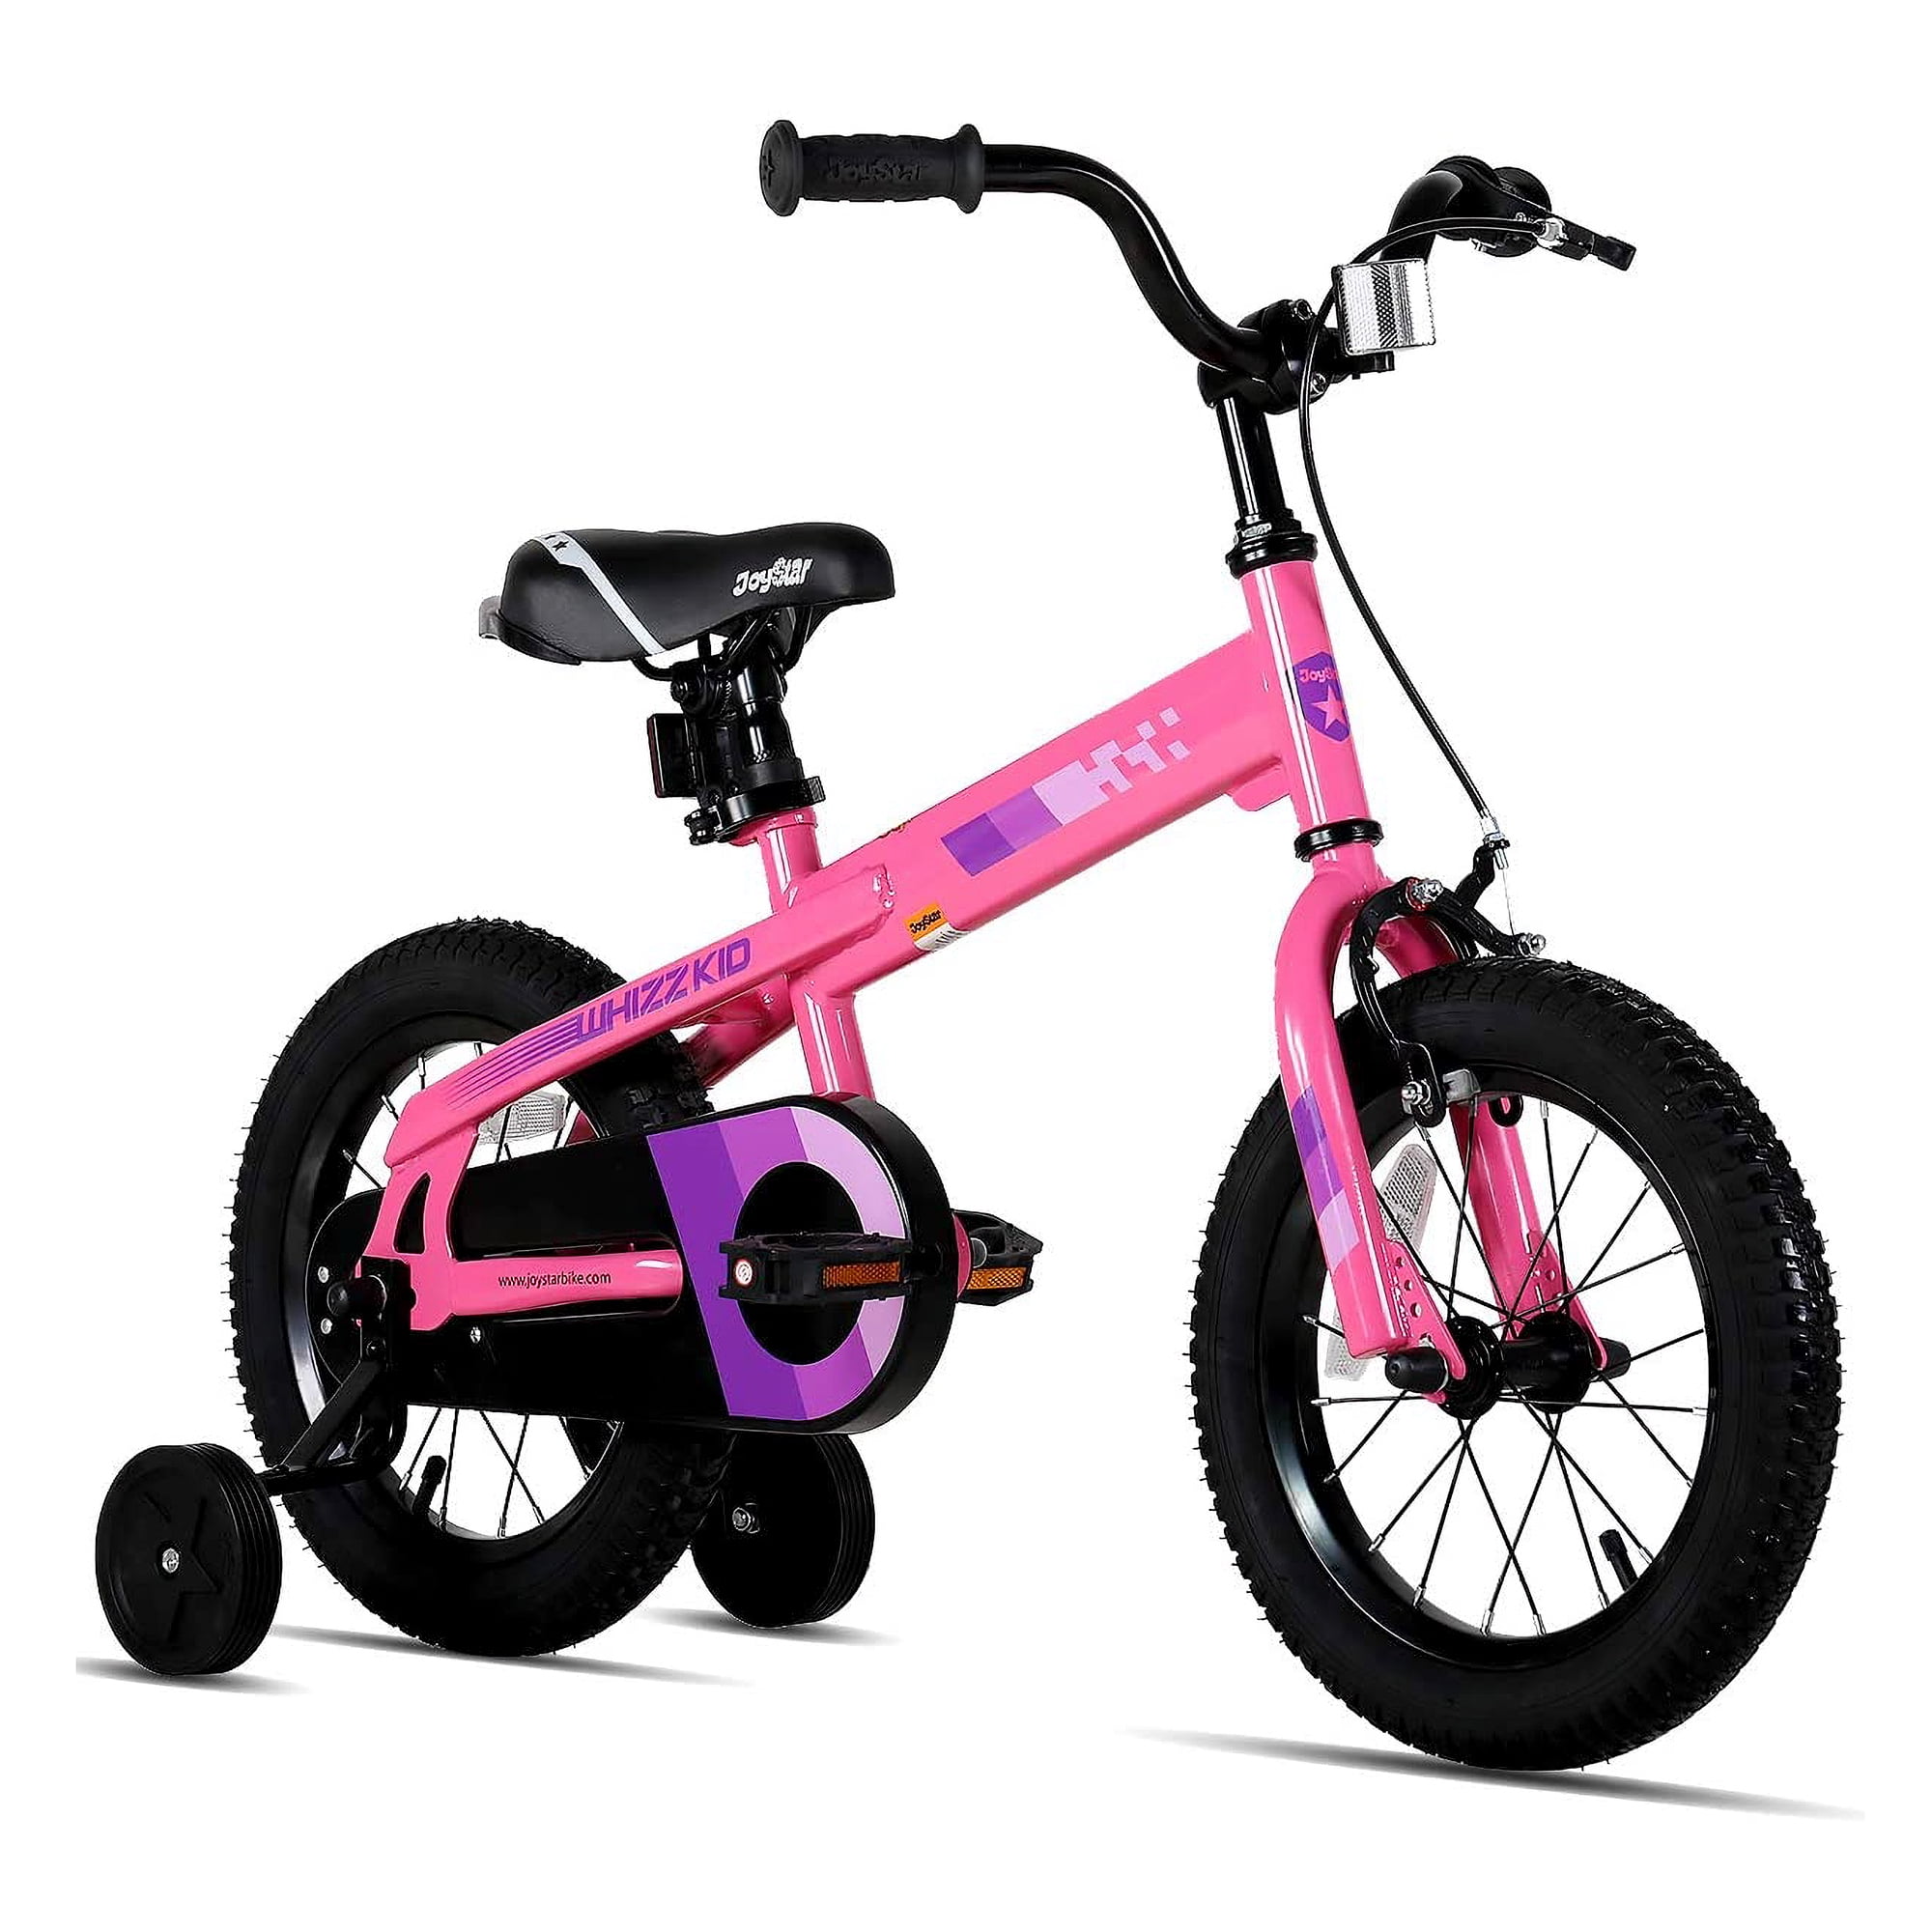 PHOENIX 14 16 18 Inch Kids Bike with Training Wheels for 3-9 Years Old Boys Girls Toddler Bike Include Basket and Installation Tools 